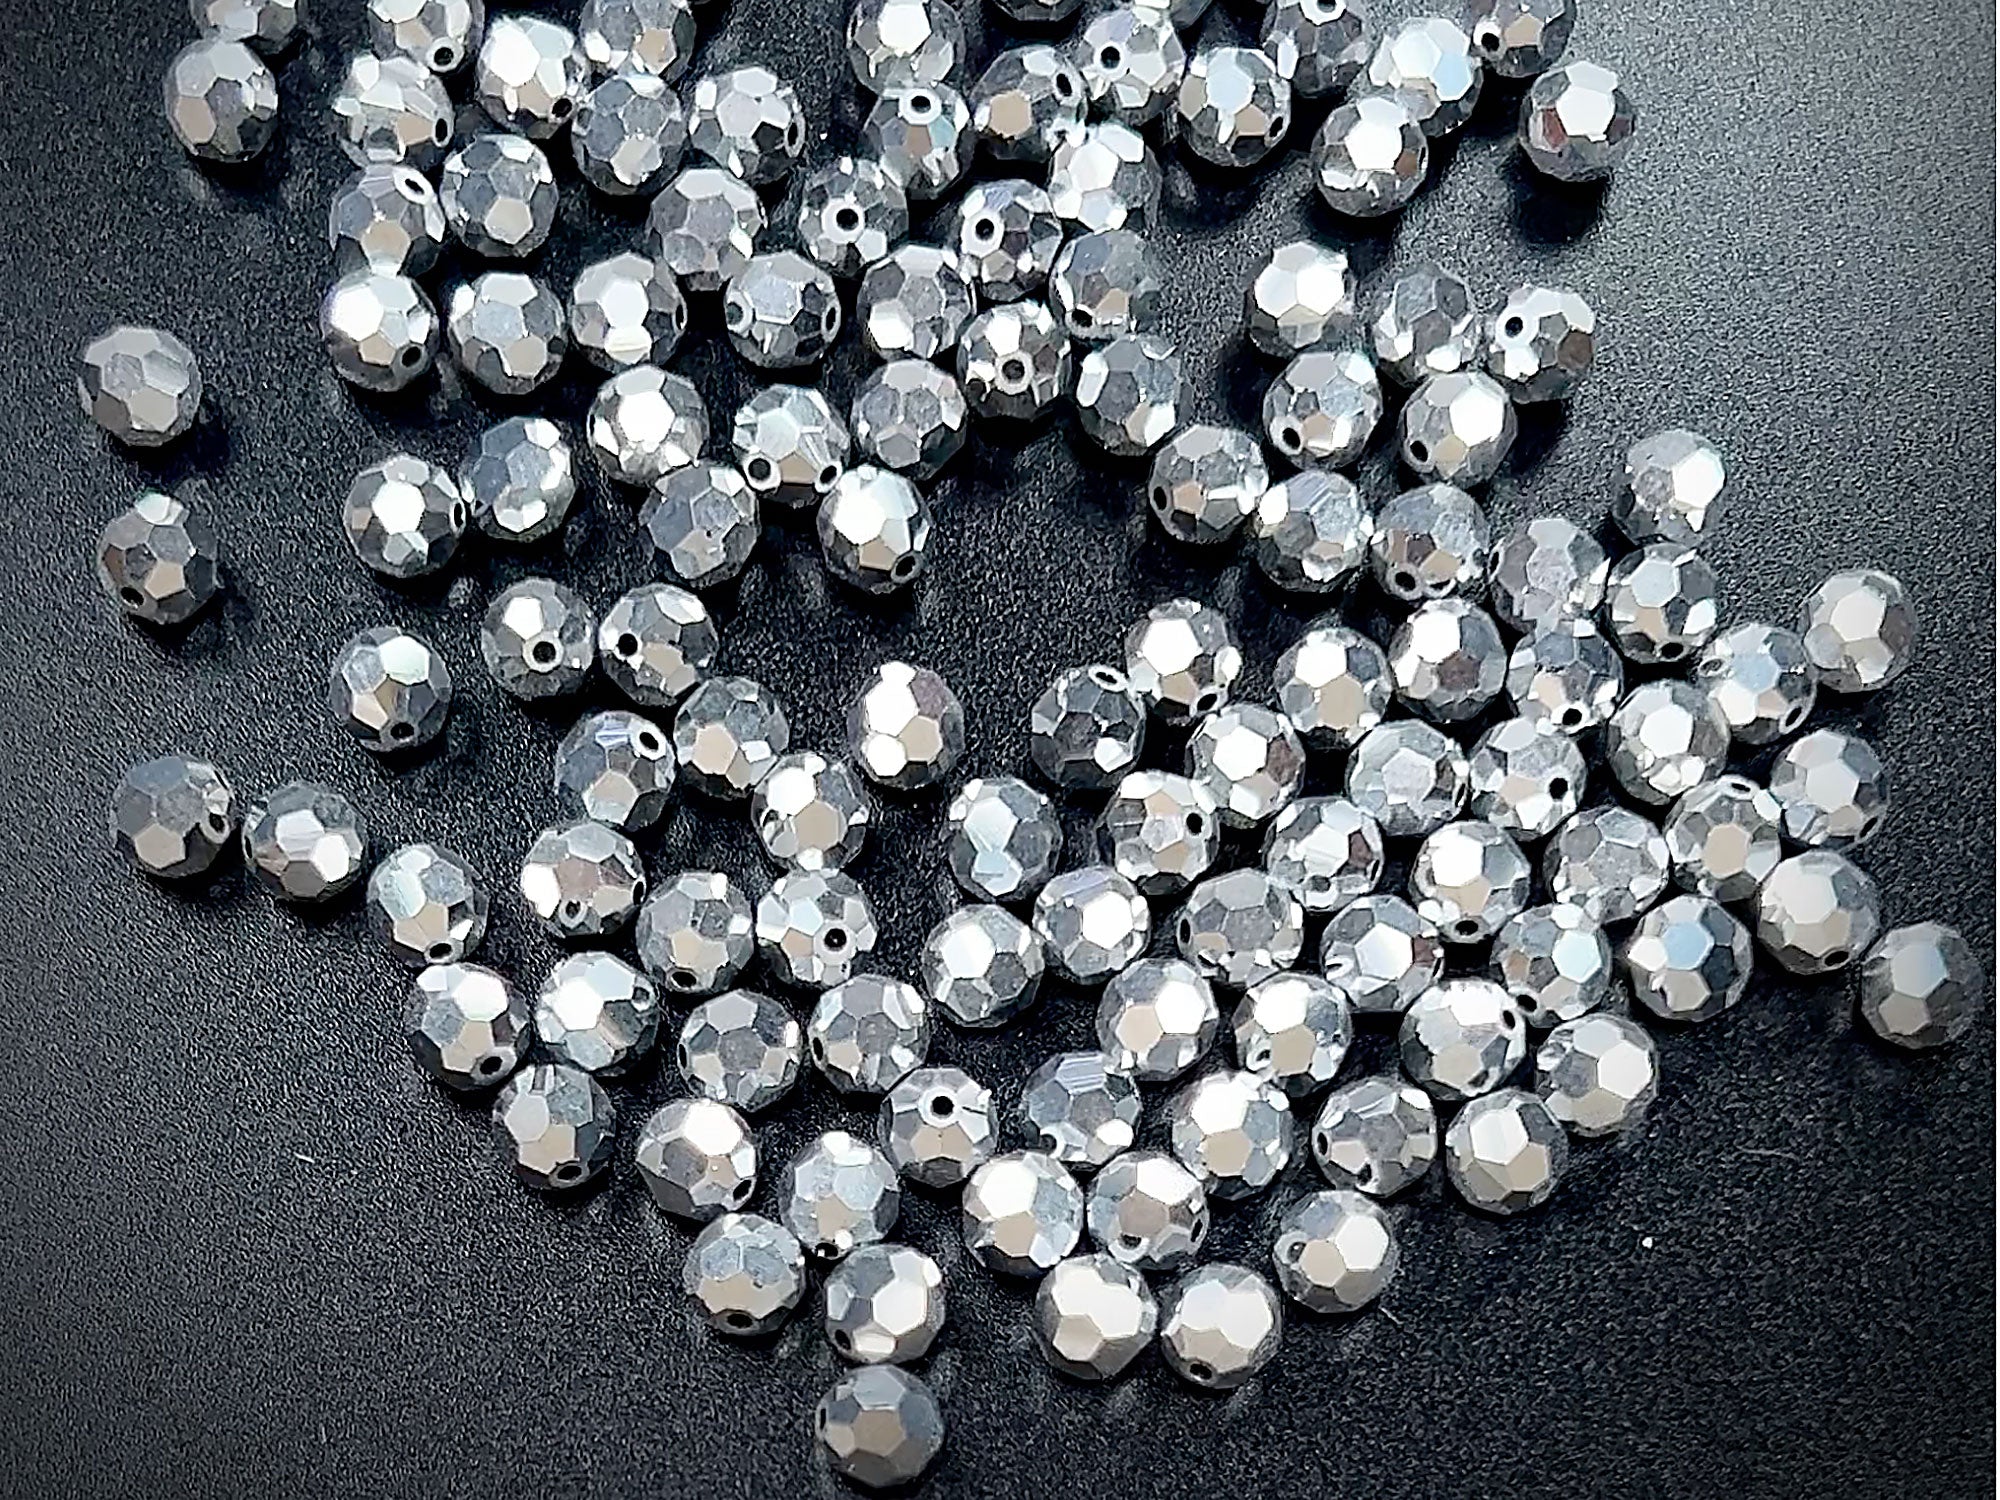 Crystal Labrador Fully coated, Czech Machine Cut Round Crystal Beads, Silver Rosary Beads, 6mm, 8mm